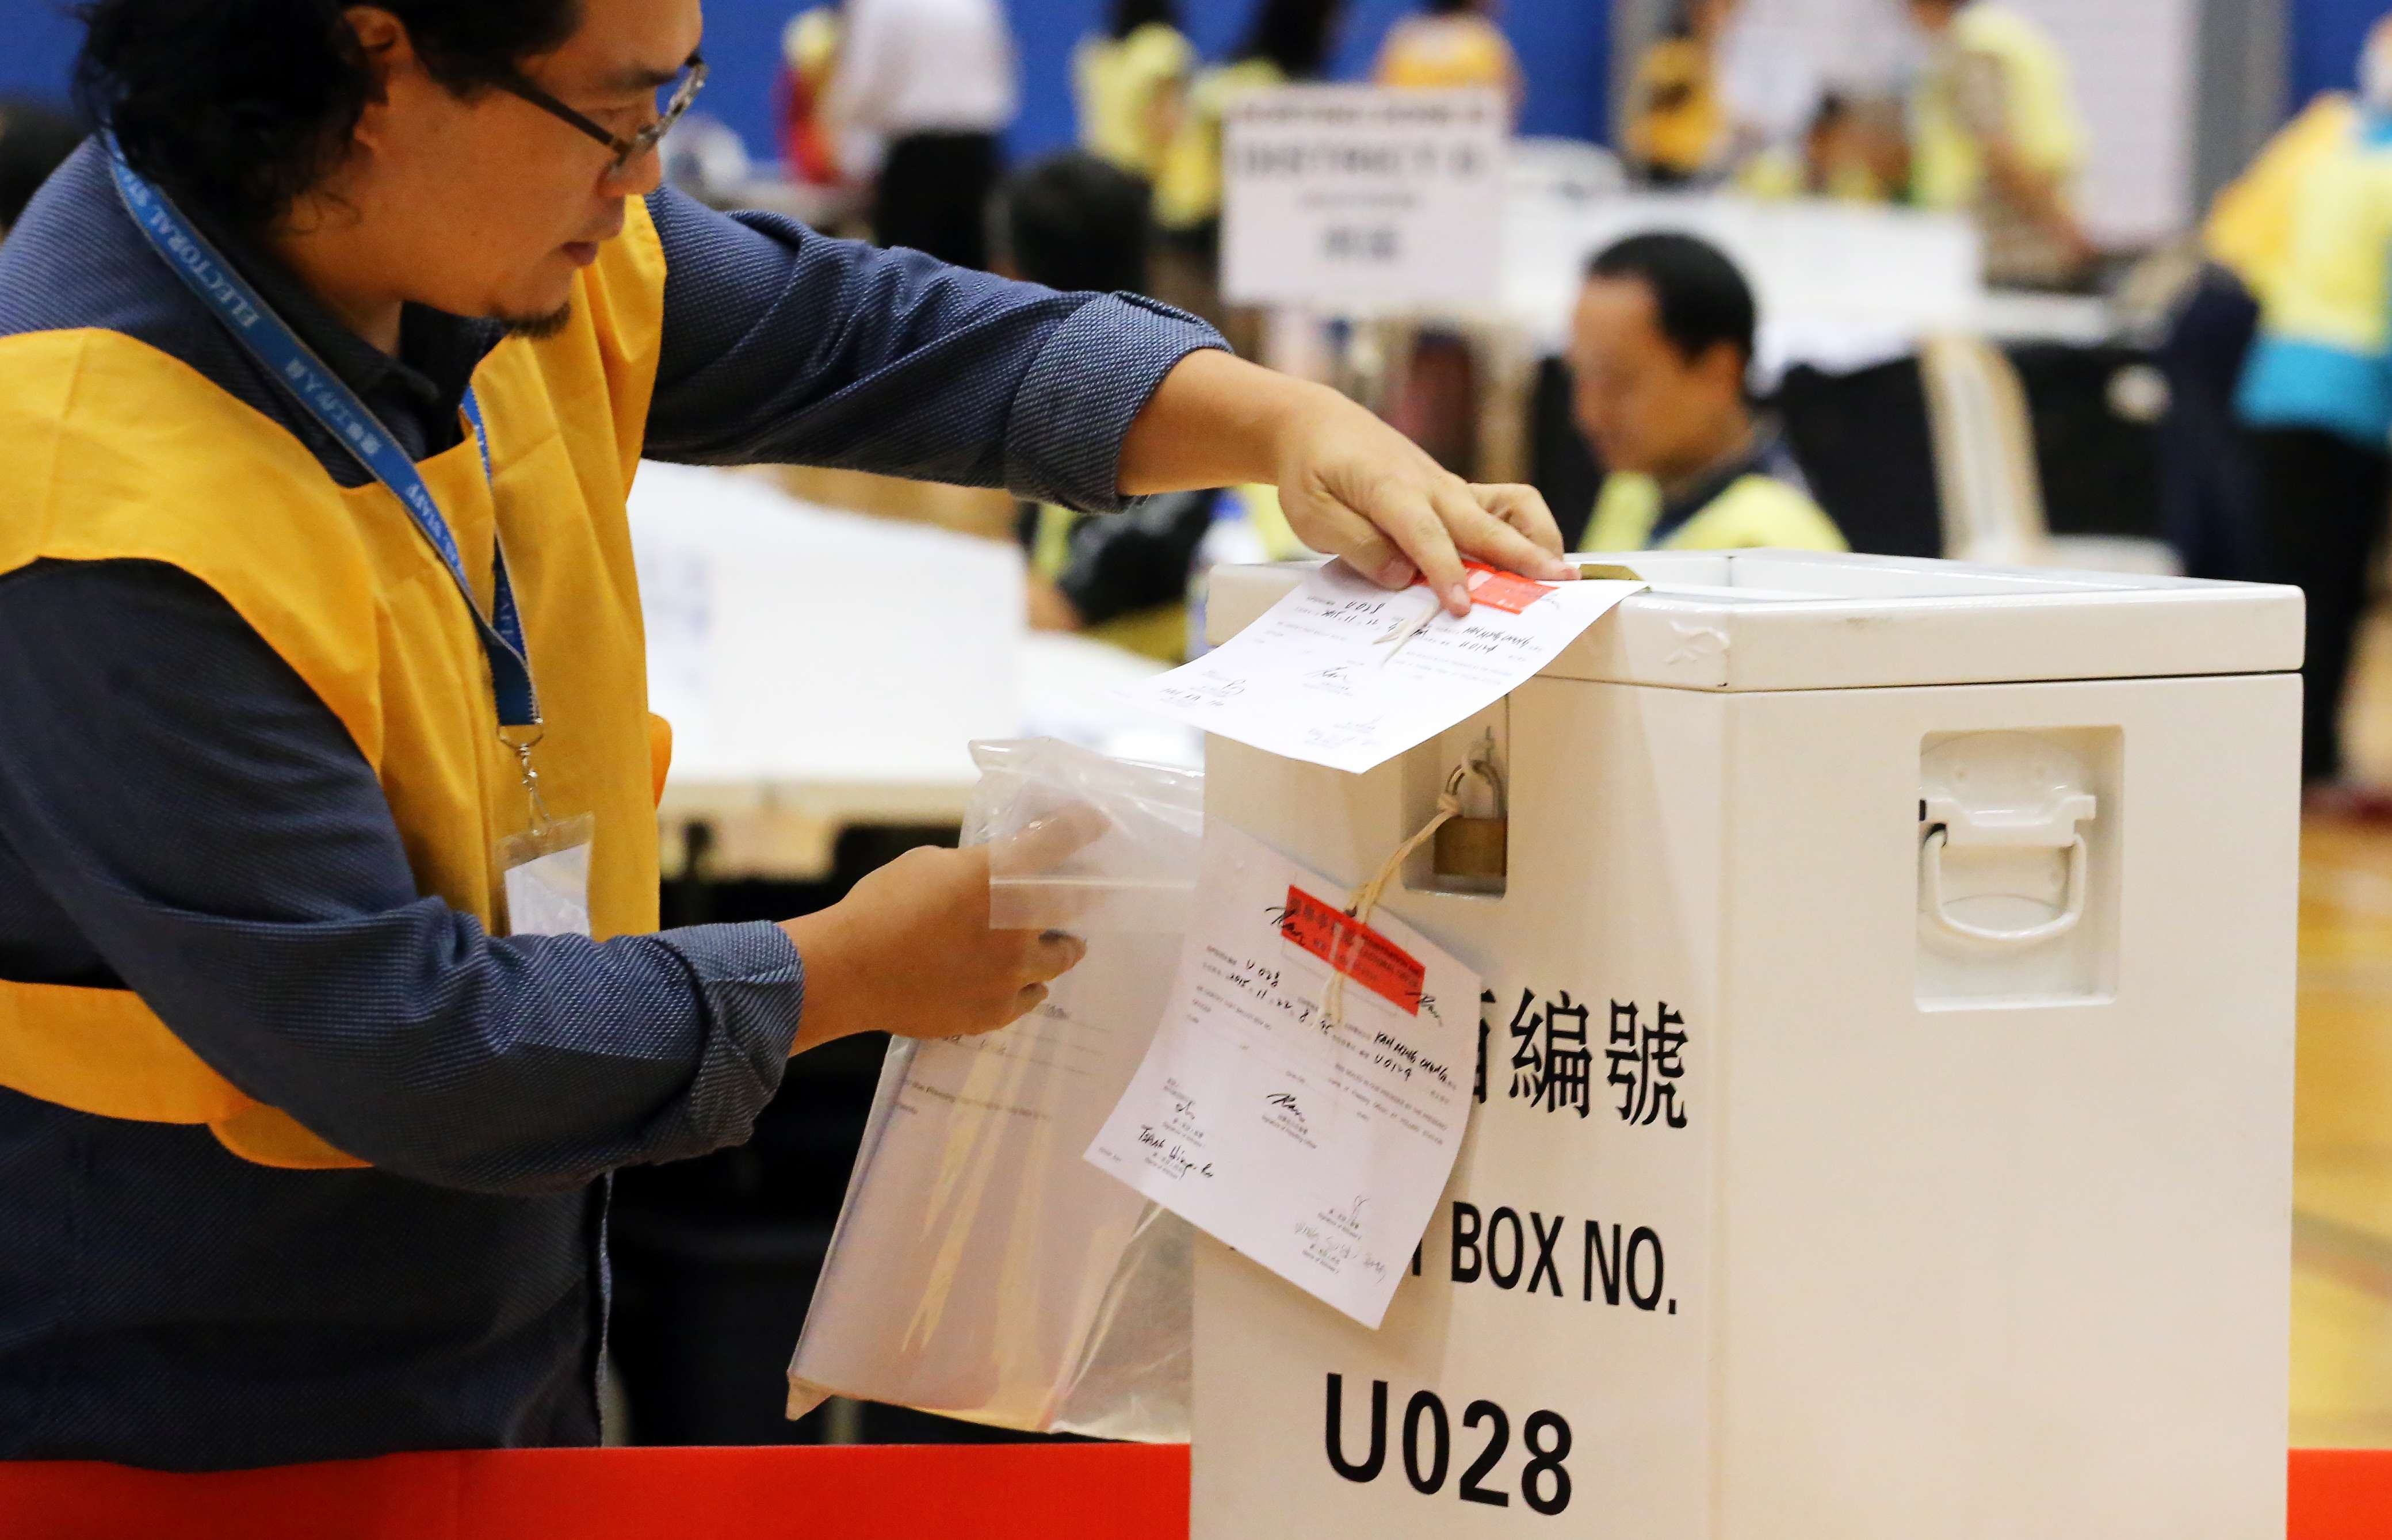 Turnout at the 2016 Legco polls was the highest since direct elections started in 1991. Photo: Felix Wong